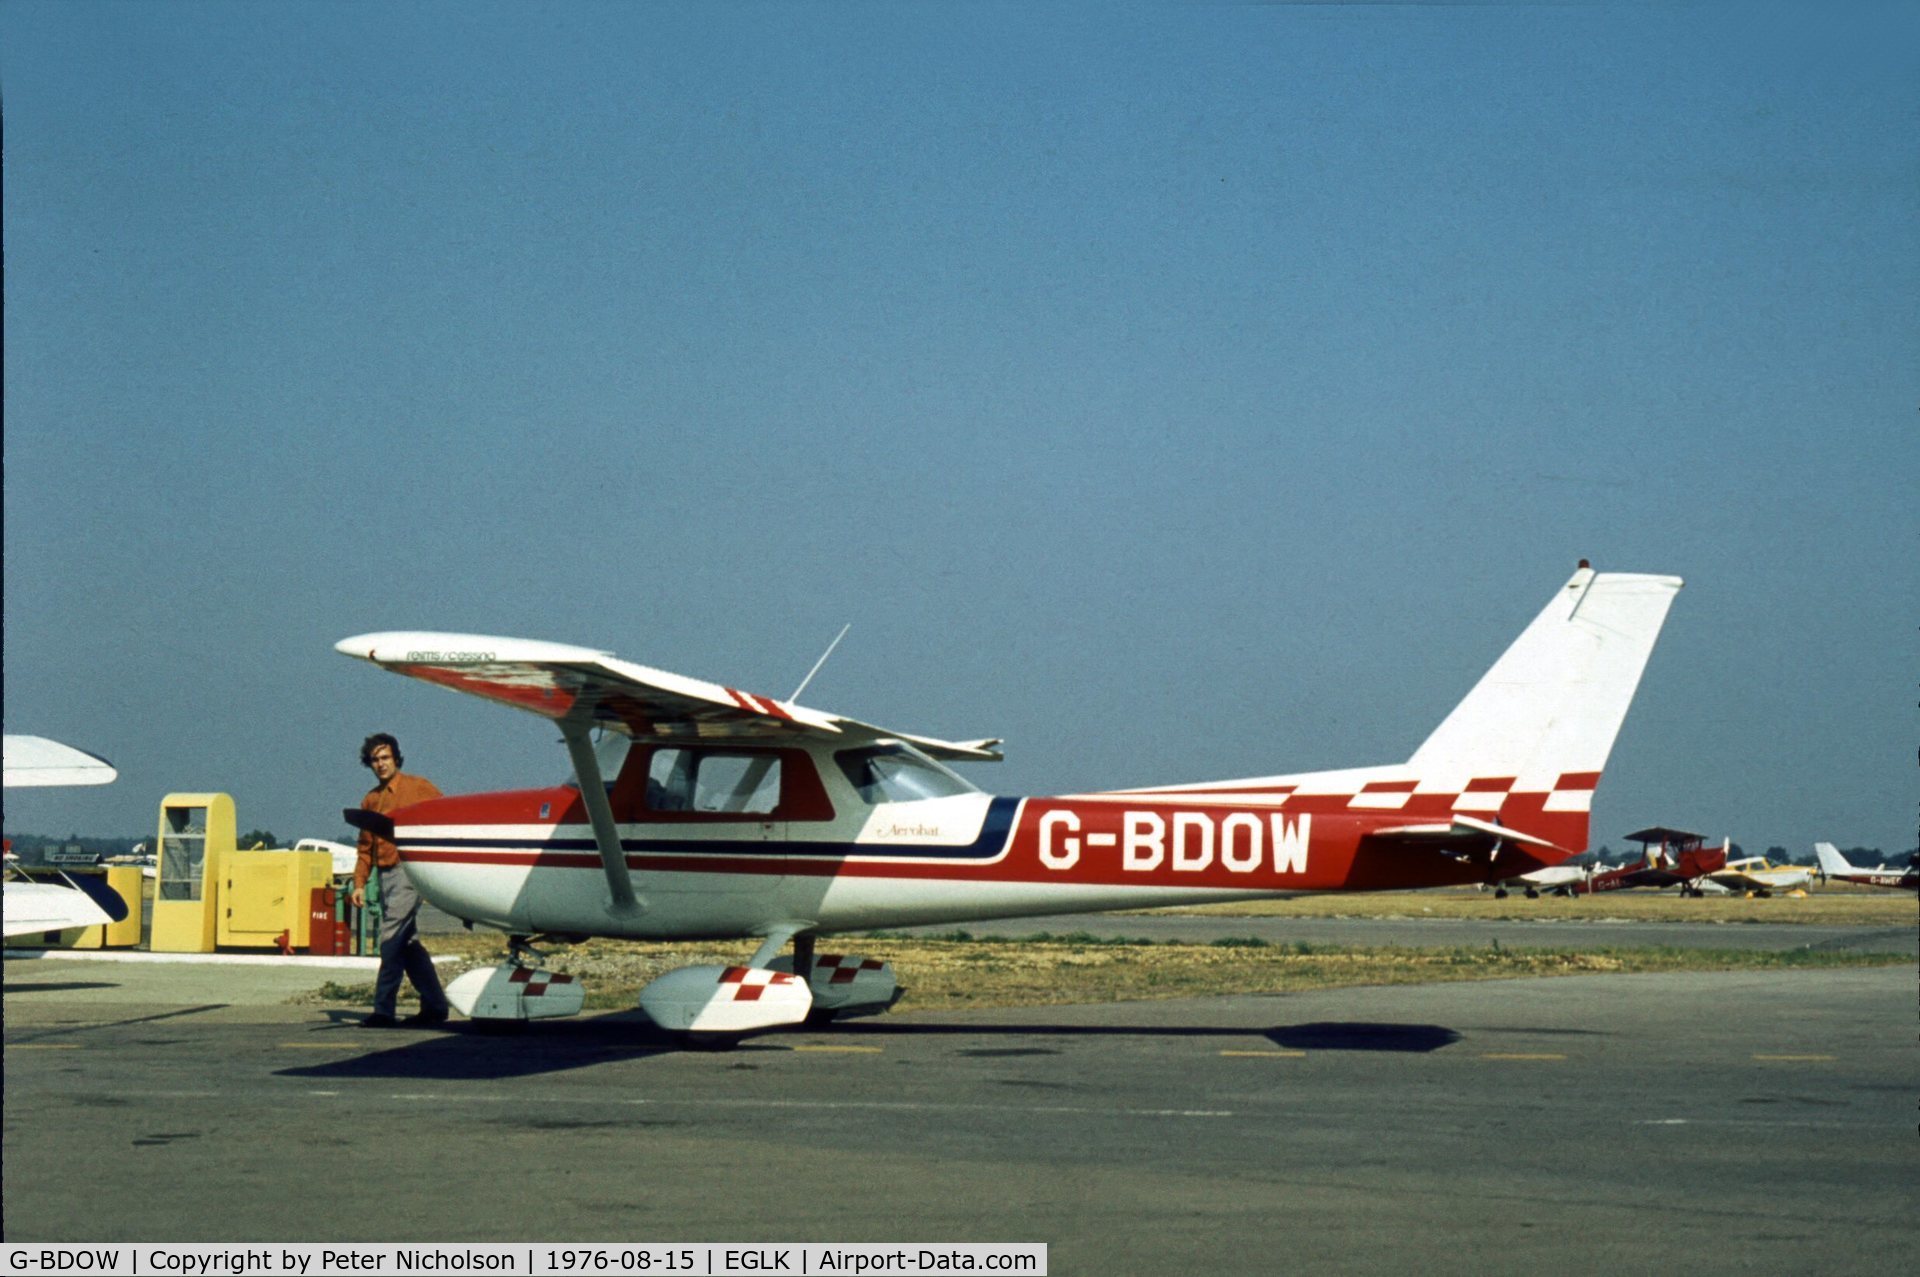 G-BDOW, 1976 Reims FRA150M Aerobat C/N 0296, A visitor to the 1976 Blackbushe Fly-in.